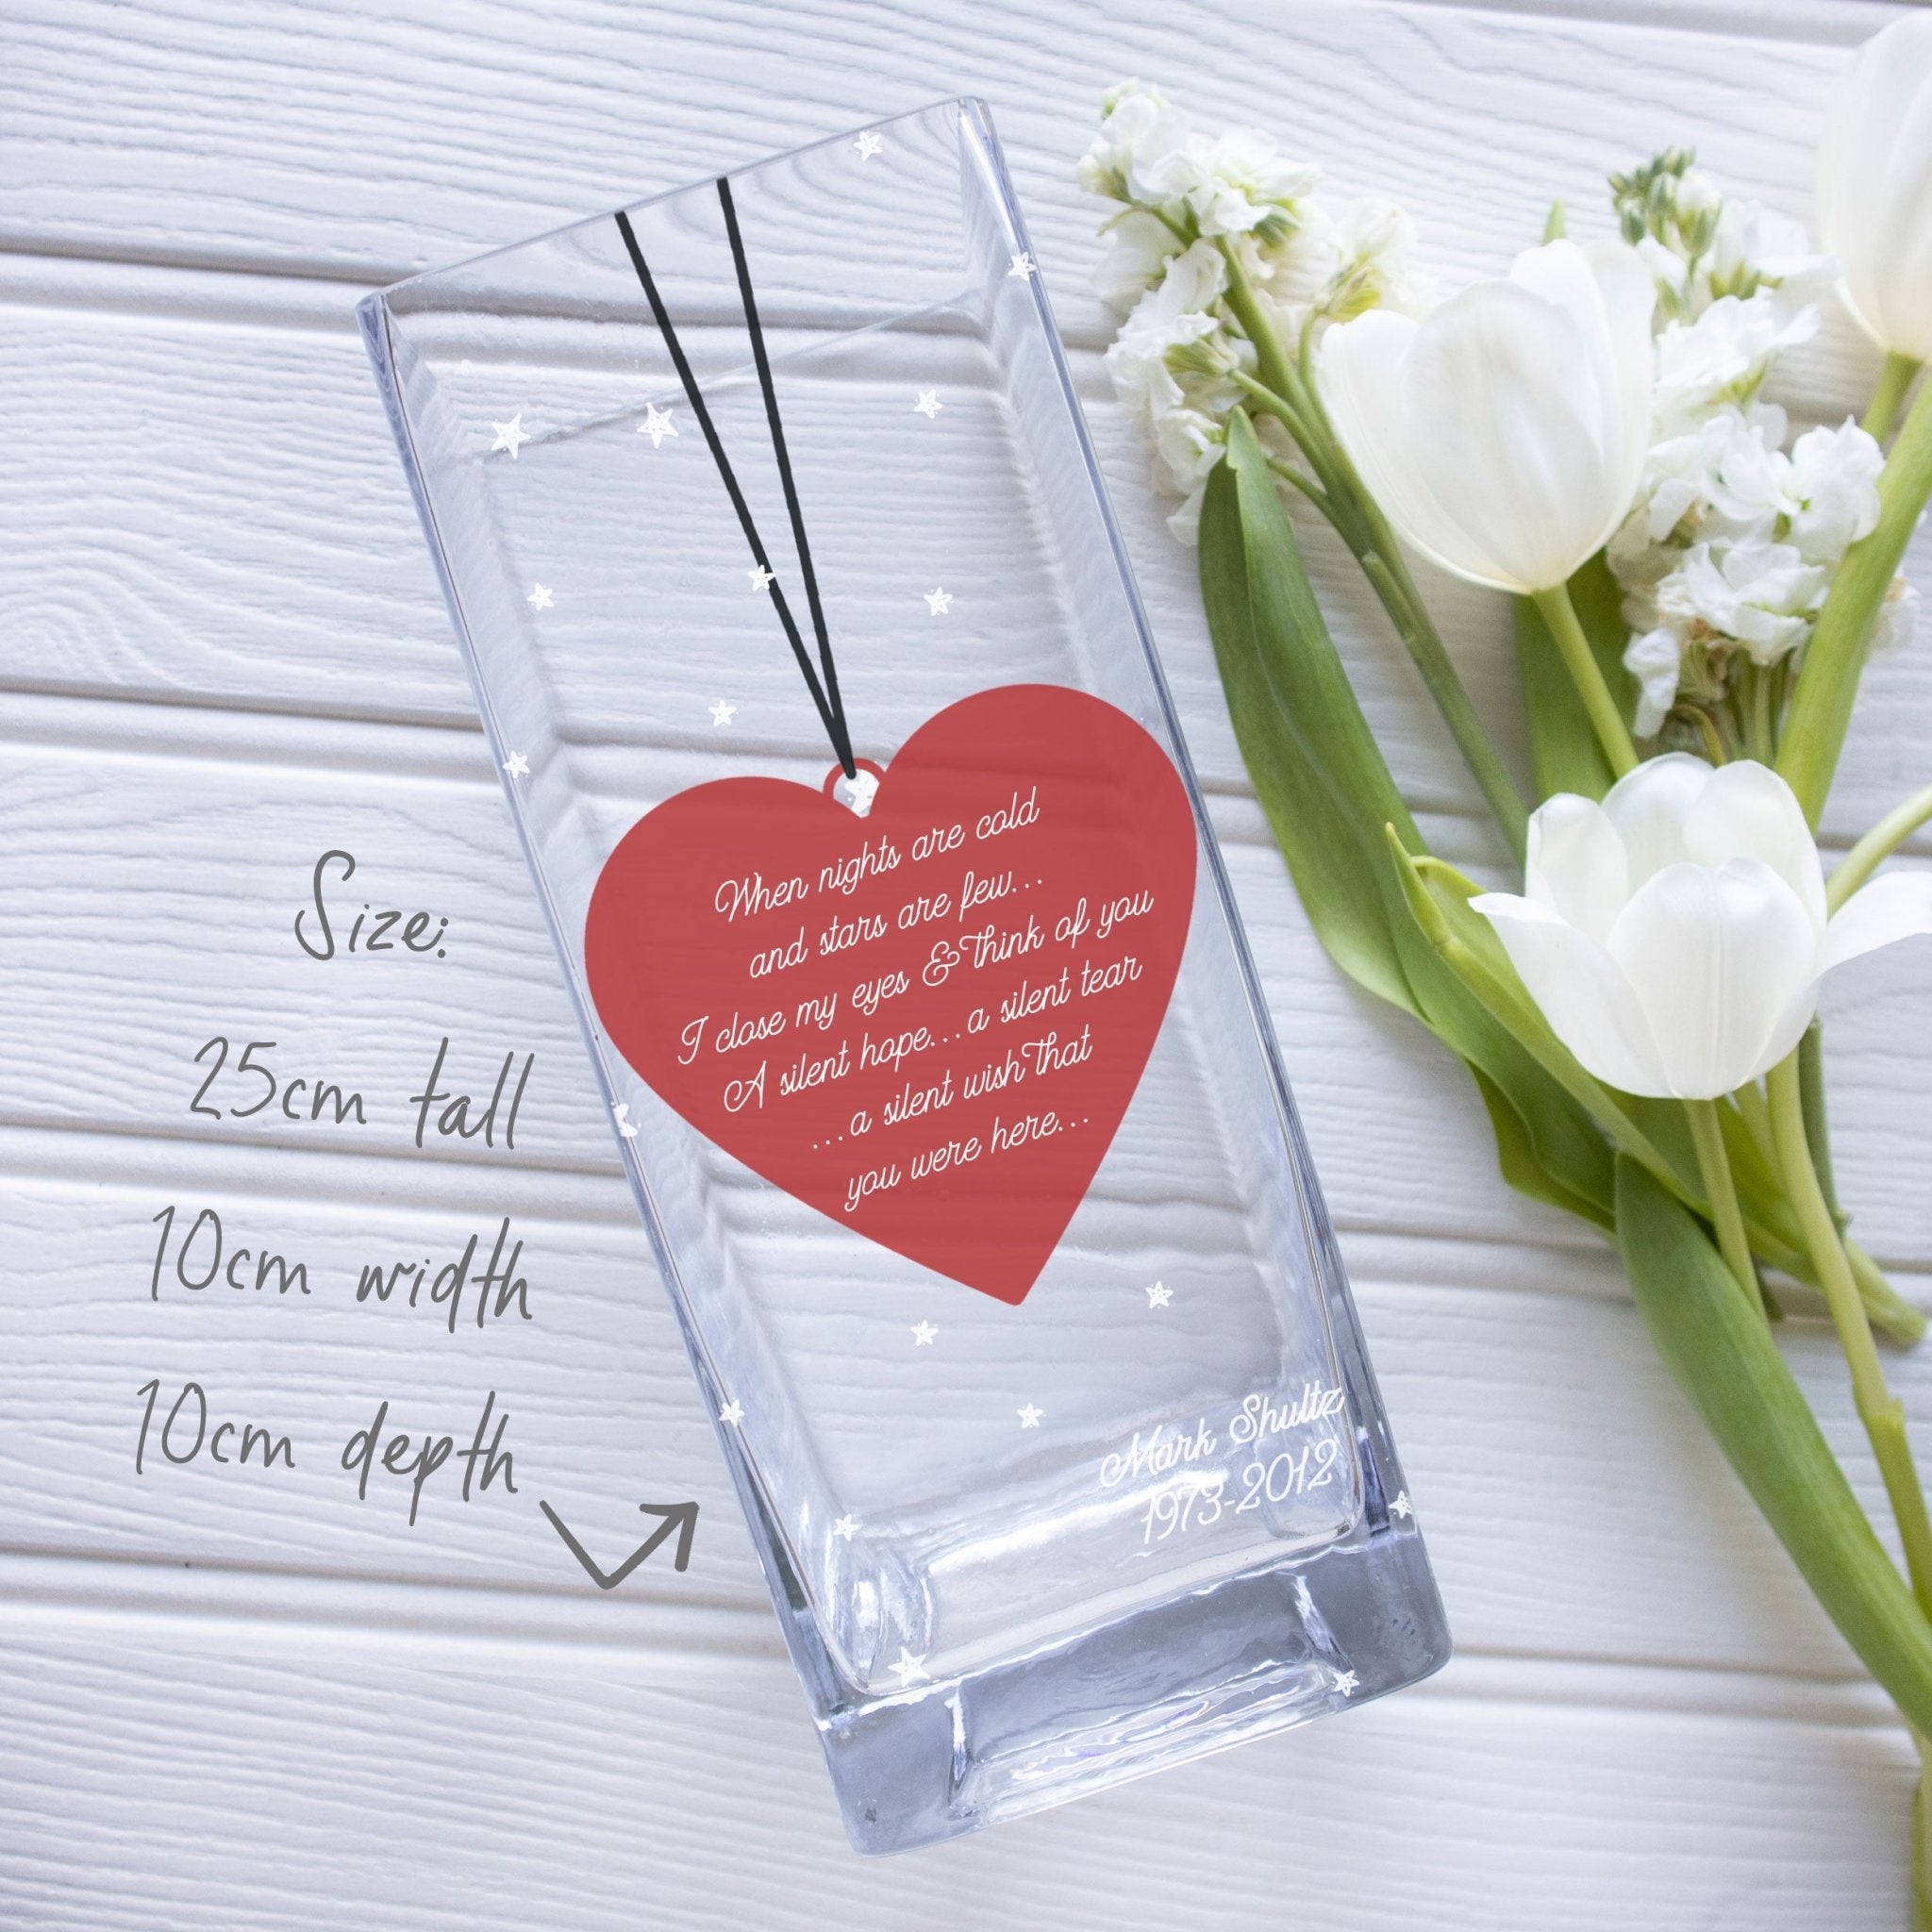 Christmas Memorial Custom Quotes Glass Vase | Xmas in Heaven Gift Ideas | Personalised Text, Acrylic Crystal Flower Stand Home Decor Present Vase - Unique Prints